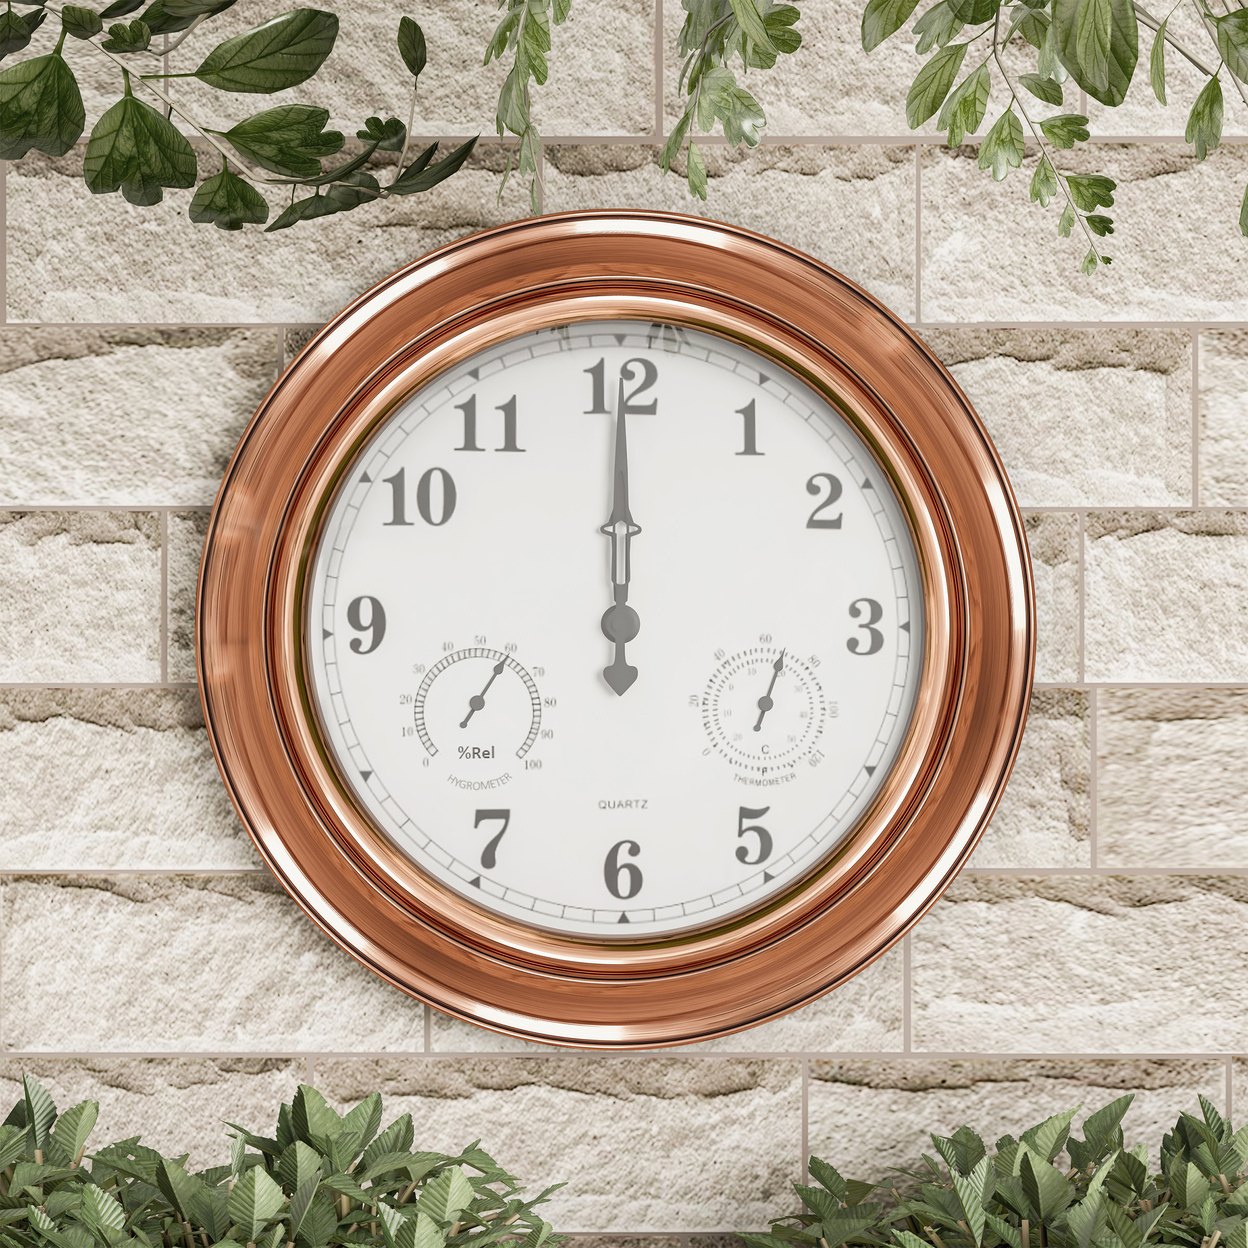 Patio Wall Clock Thermometer-Indoor/Outdoor Decorative 18 Battery-Powered